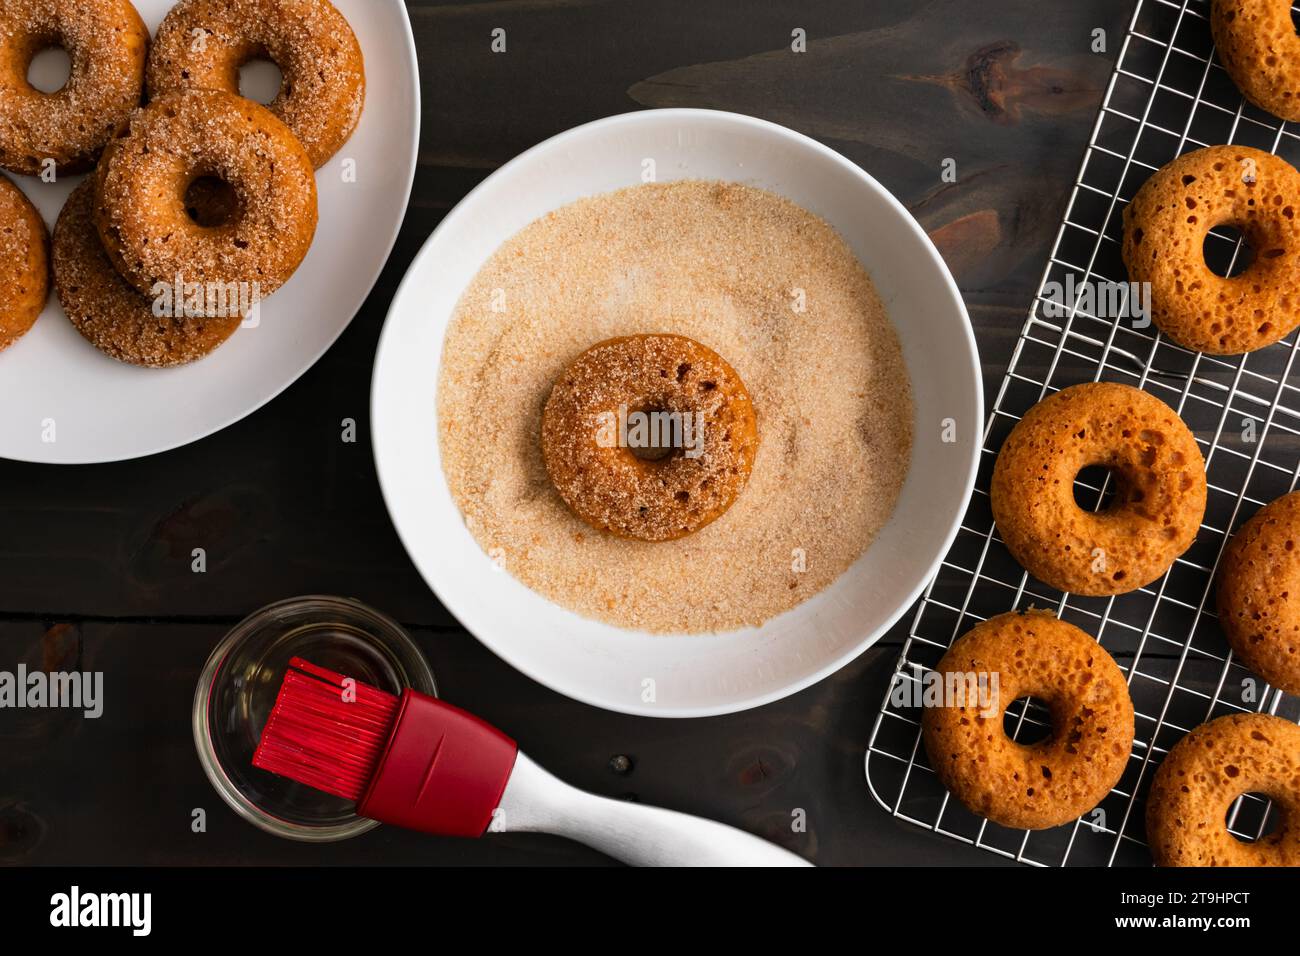 Dipping Baked Apple Cider Donuts in Cinnamon Sugar: Baked doughnut in a shallow bowl full of organic cane sugar and ground cinnamon Stock Photo